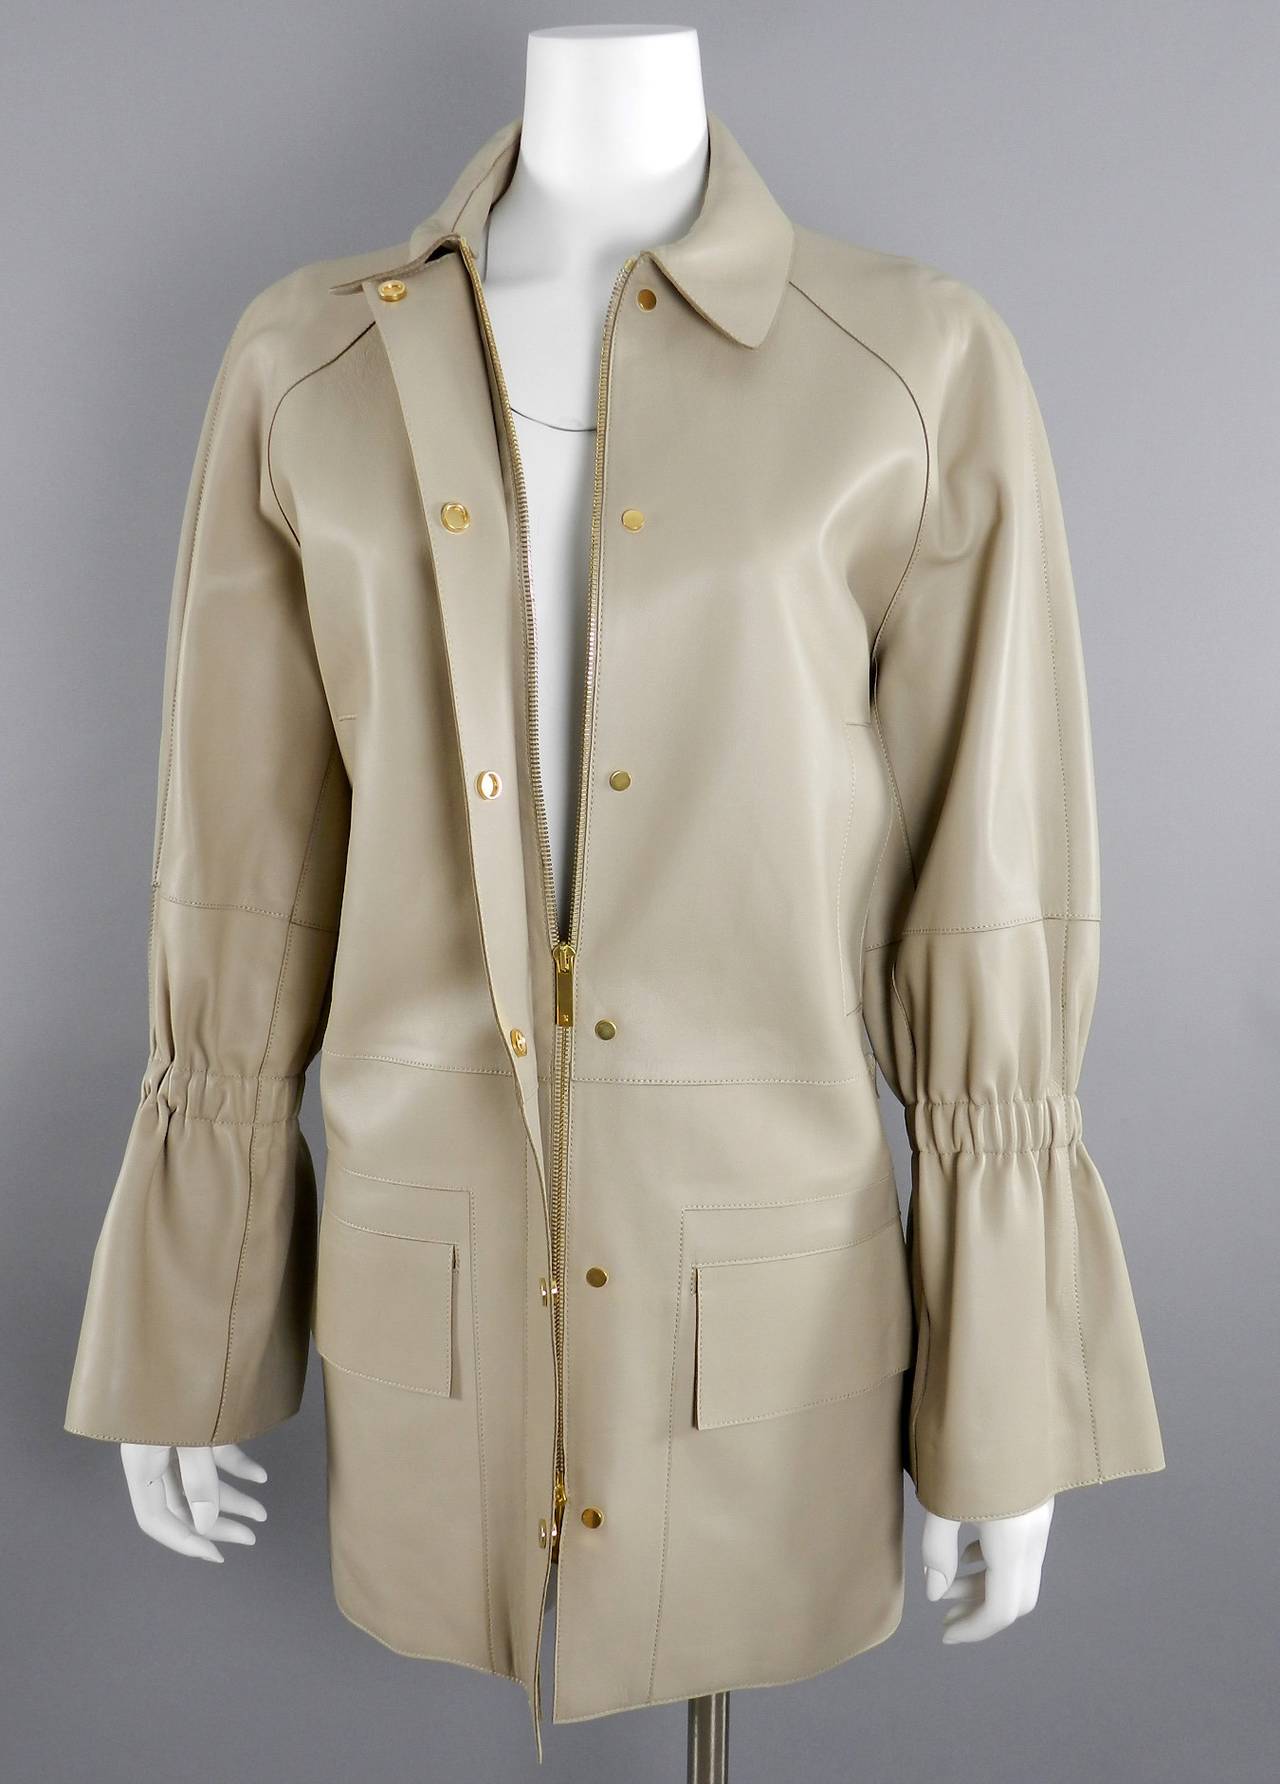 Women's The Row Beige Leather Jacket with Gold Snaps